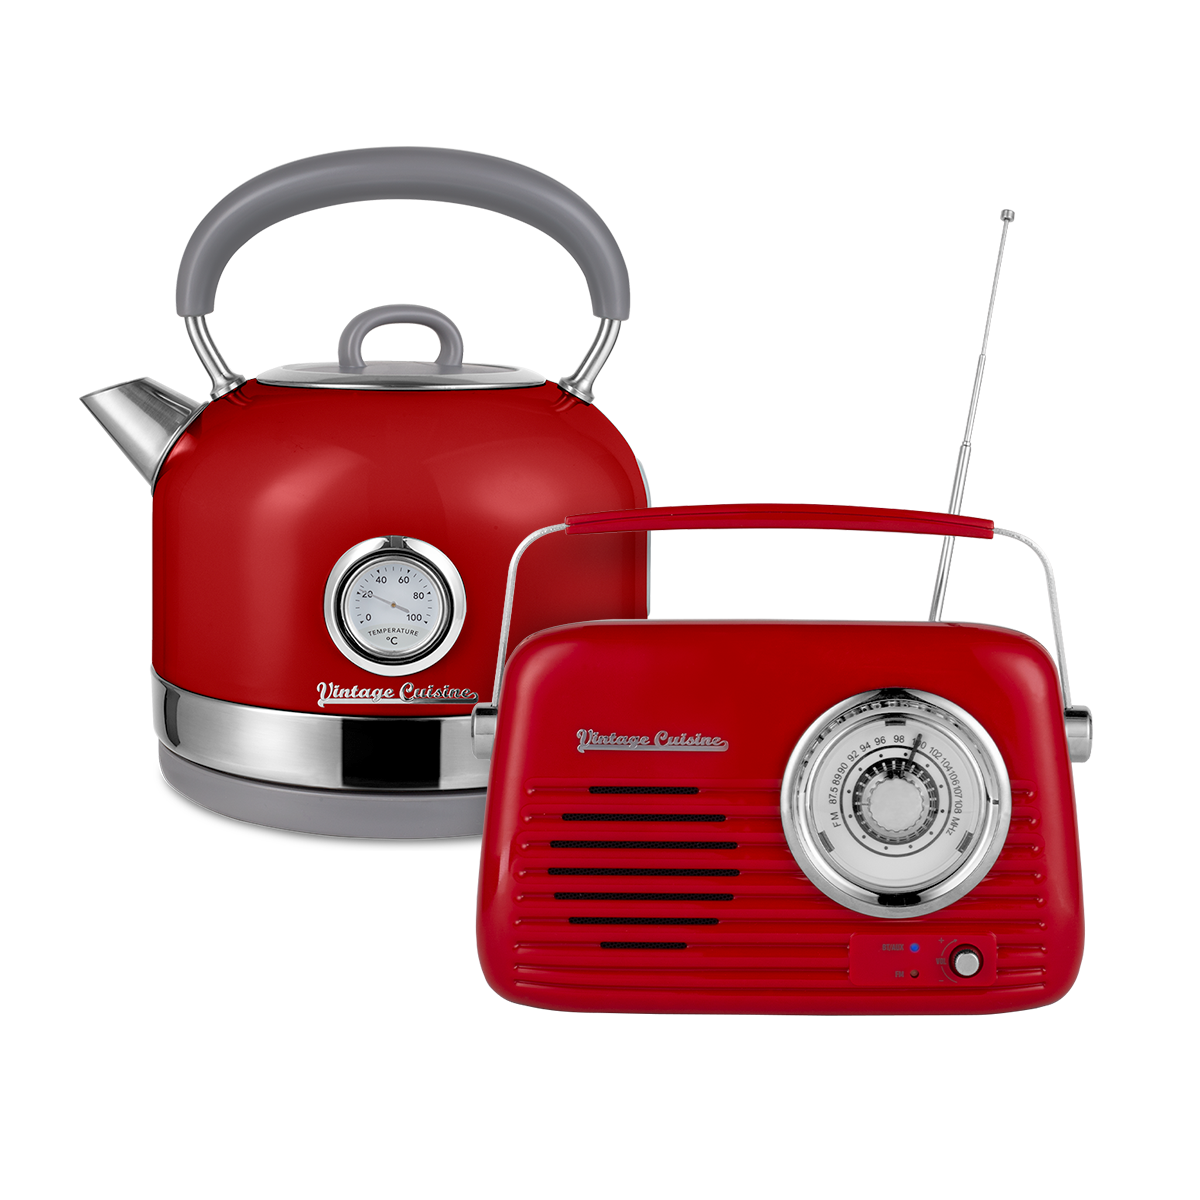 Music lover's set: retro chrome radio with Bluetooth speaker and retro electric kettle with thermometer